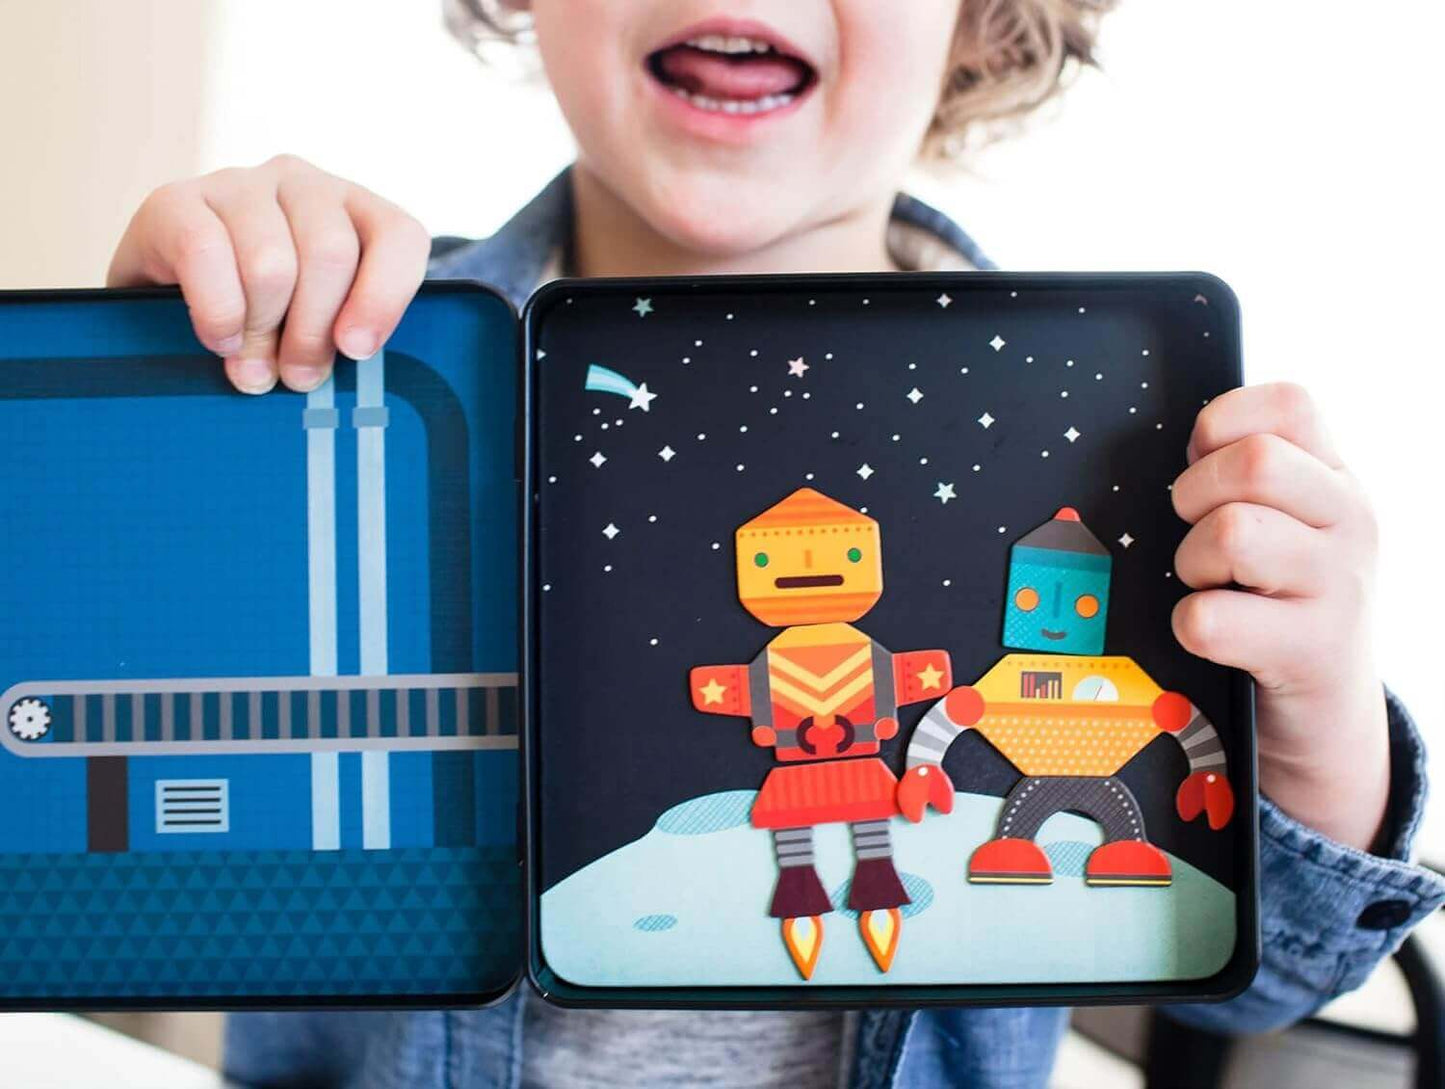 Robot Remix On-the-Go Magnetic Play Set